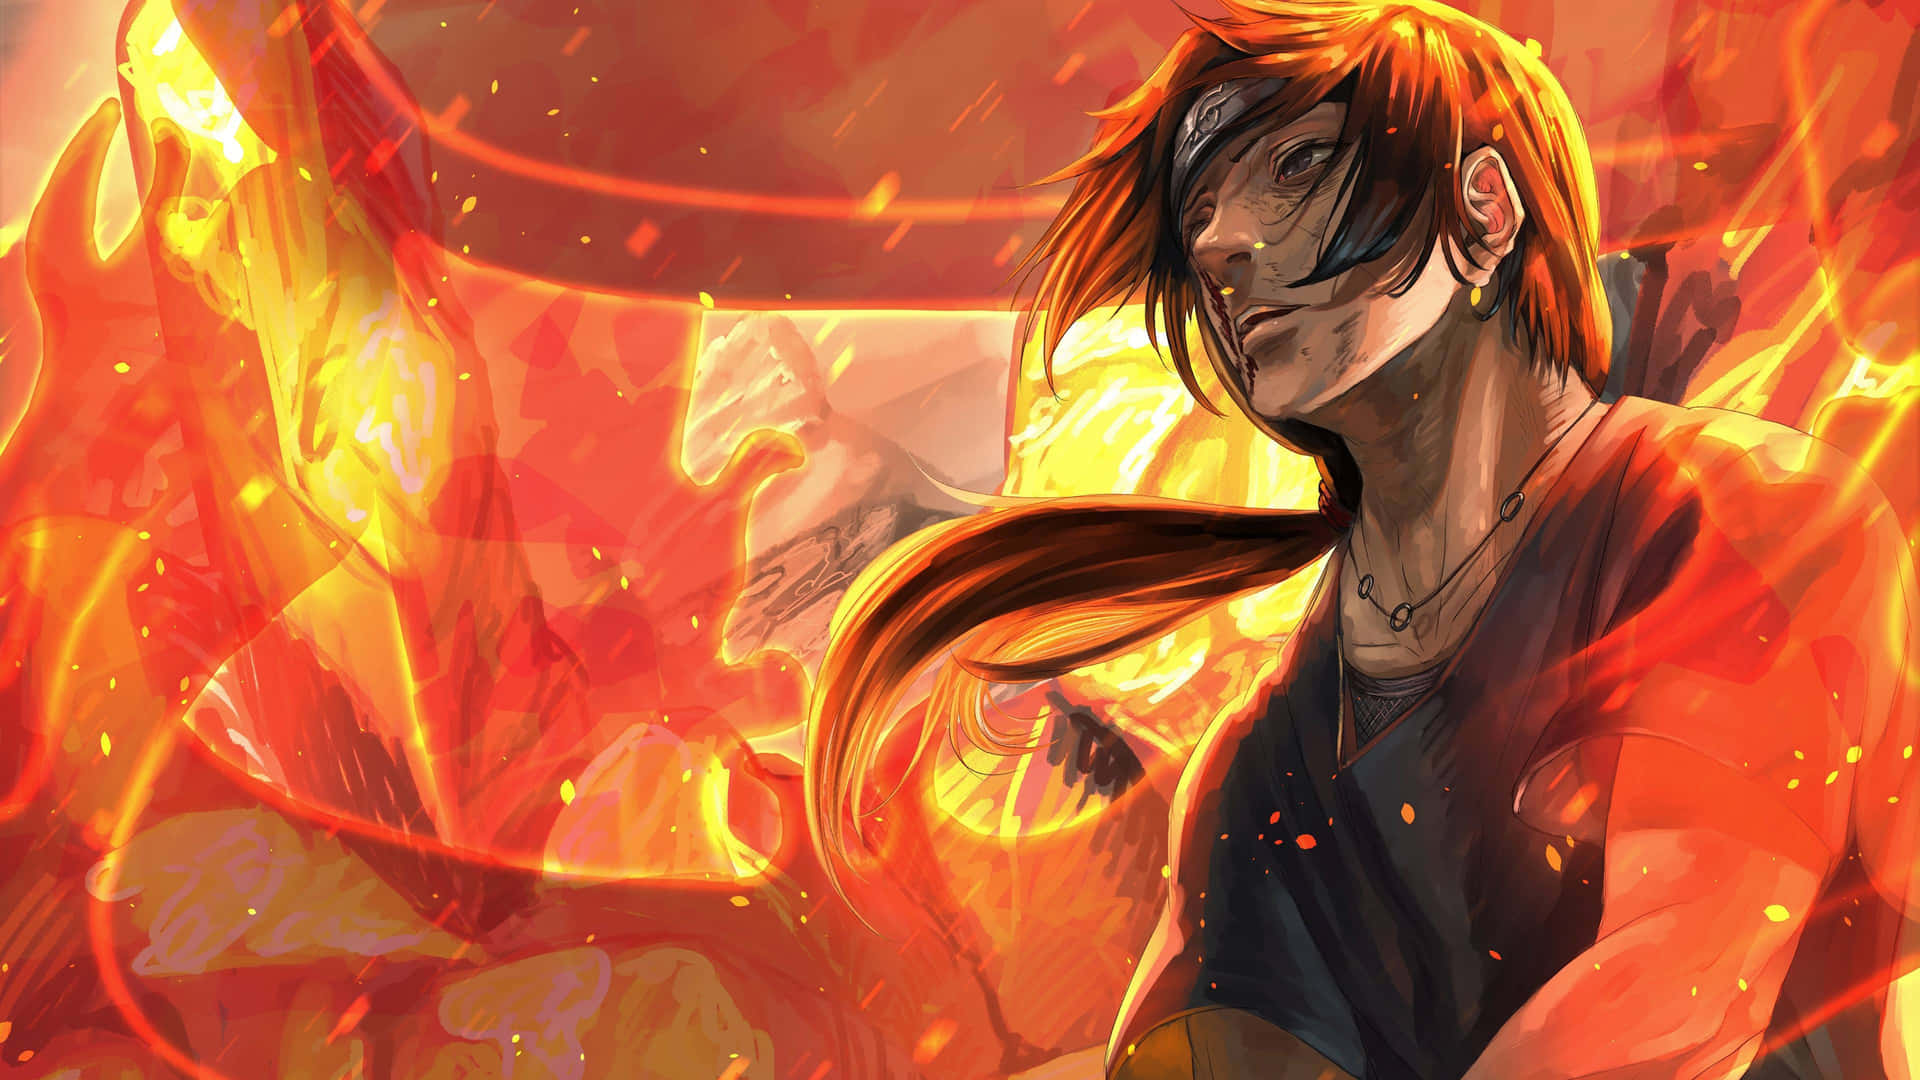 Feel the heat of Naruto's Fire Wallpaper